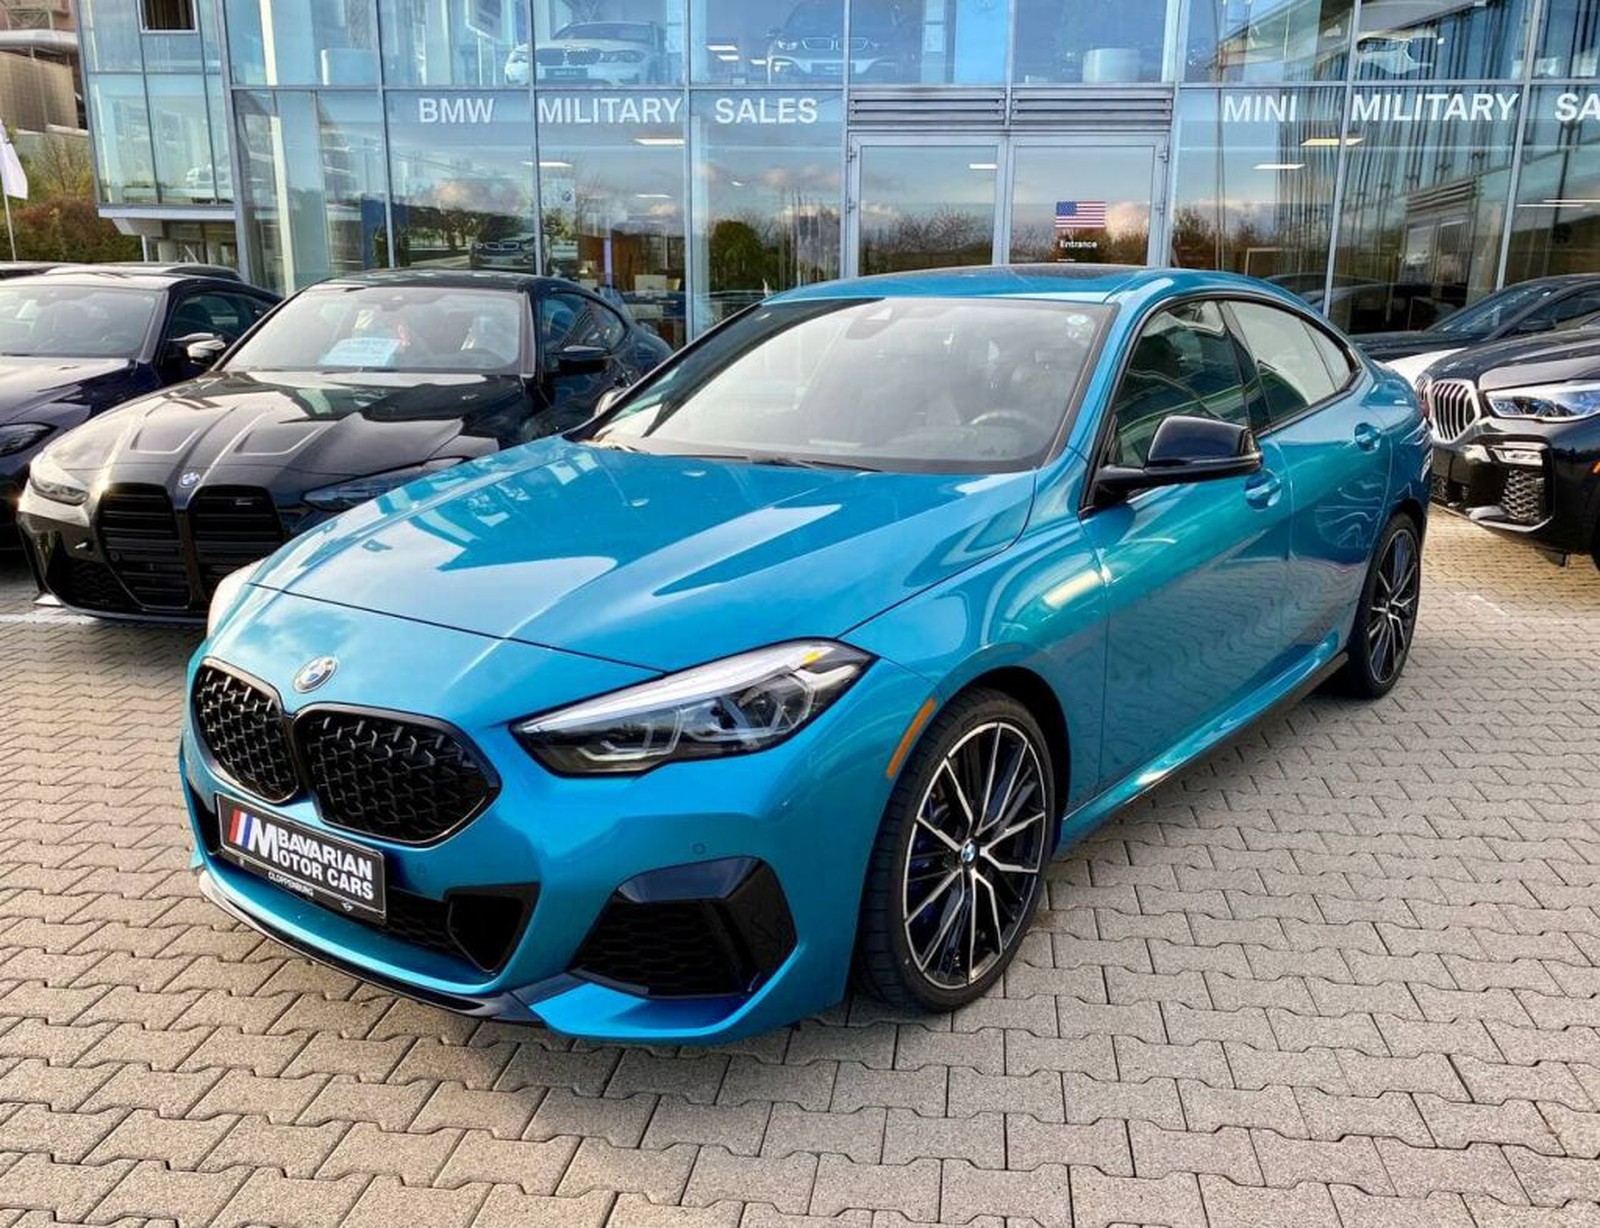 BMW M235i xDrive Gran Coupe - Tax Free Military Sales in Kaiserslautern